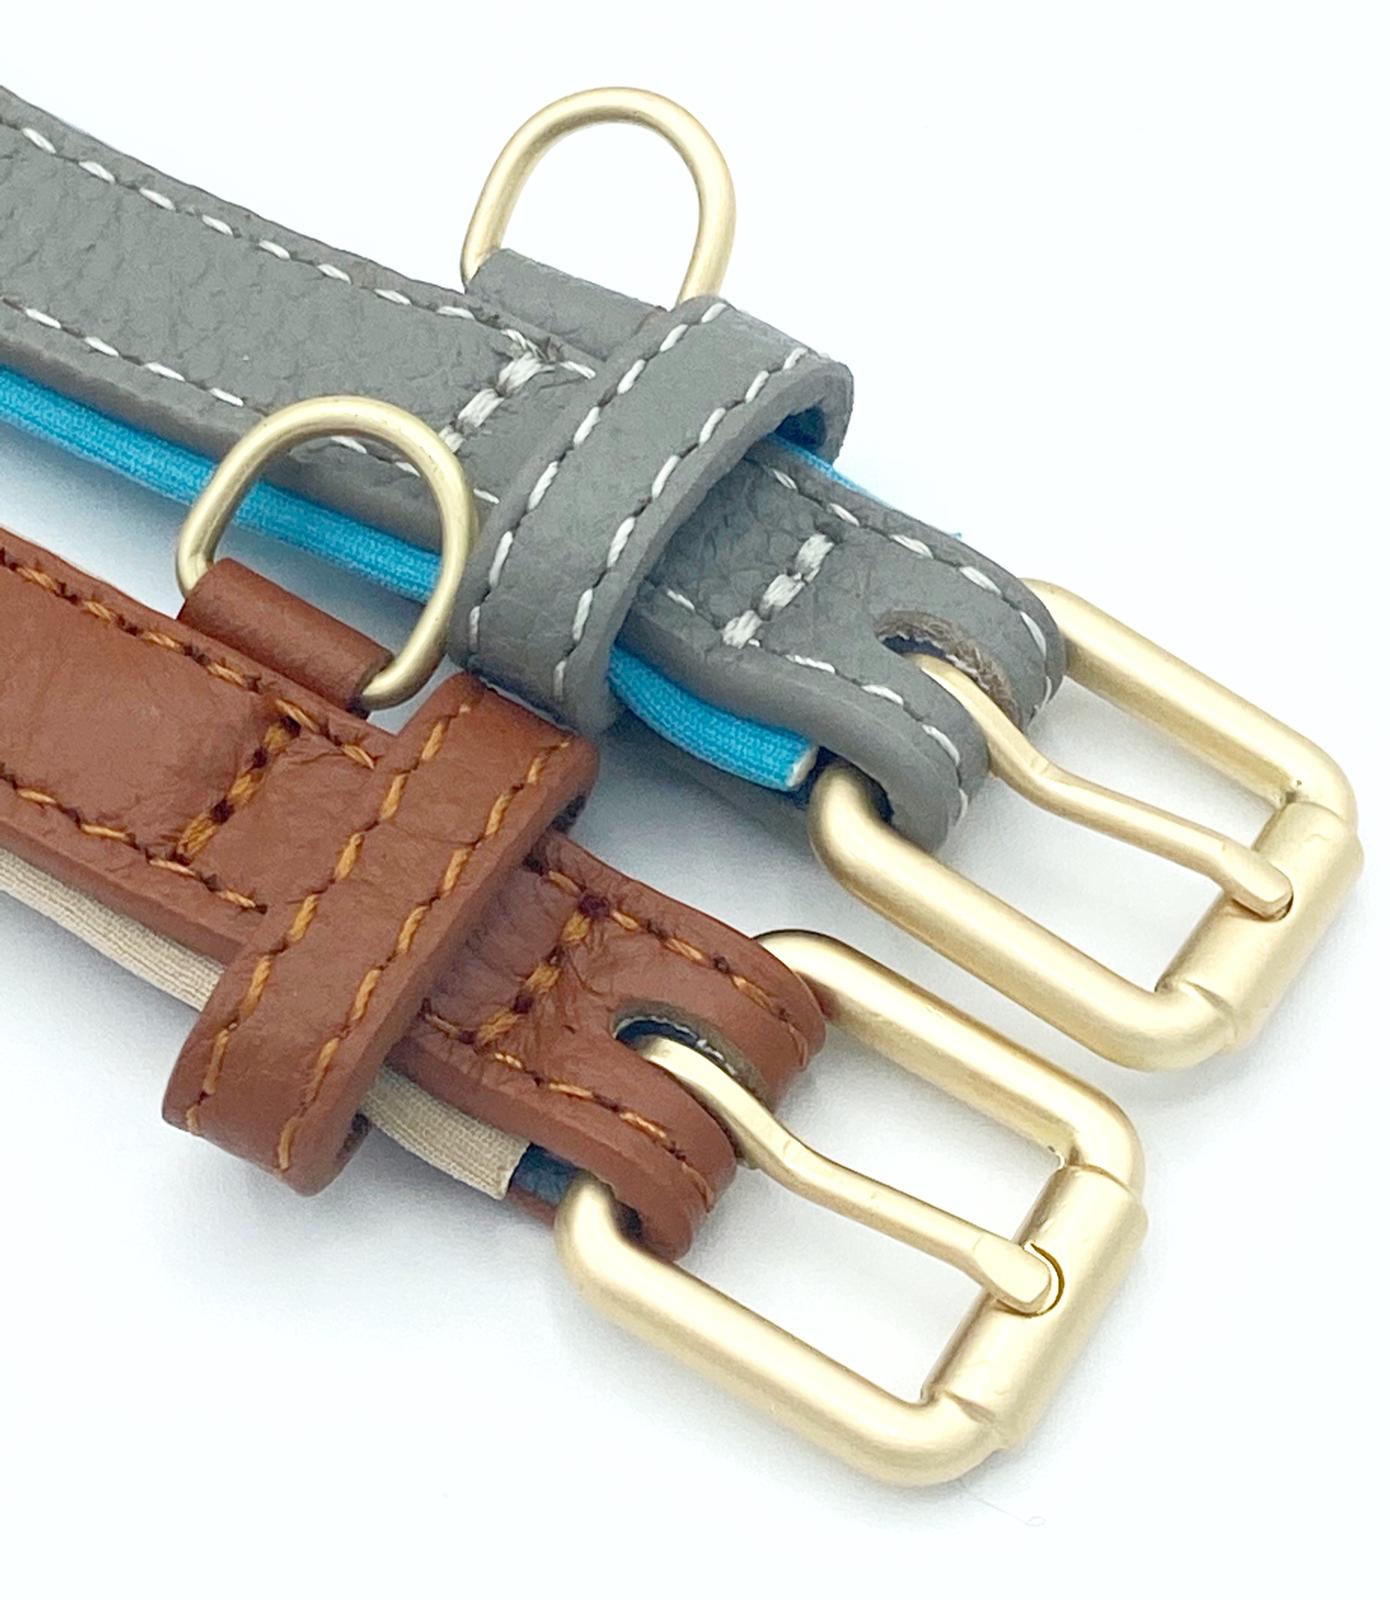 Two leather dog collars buckles